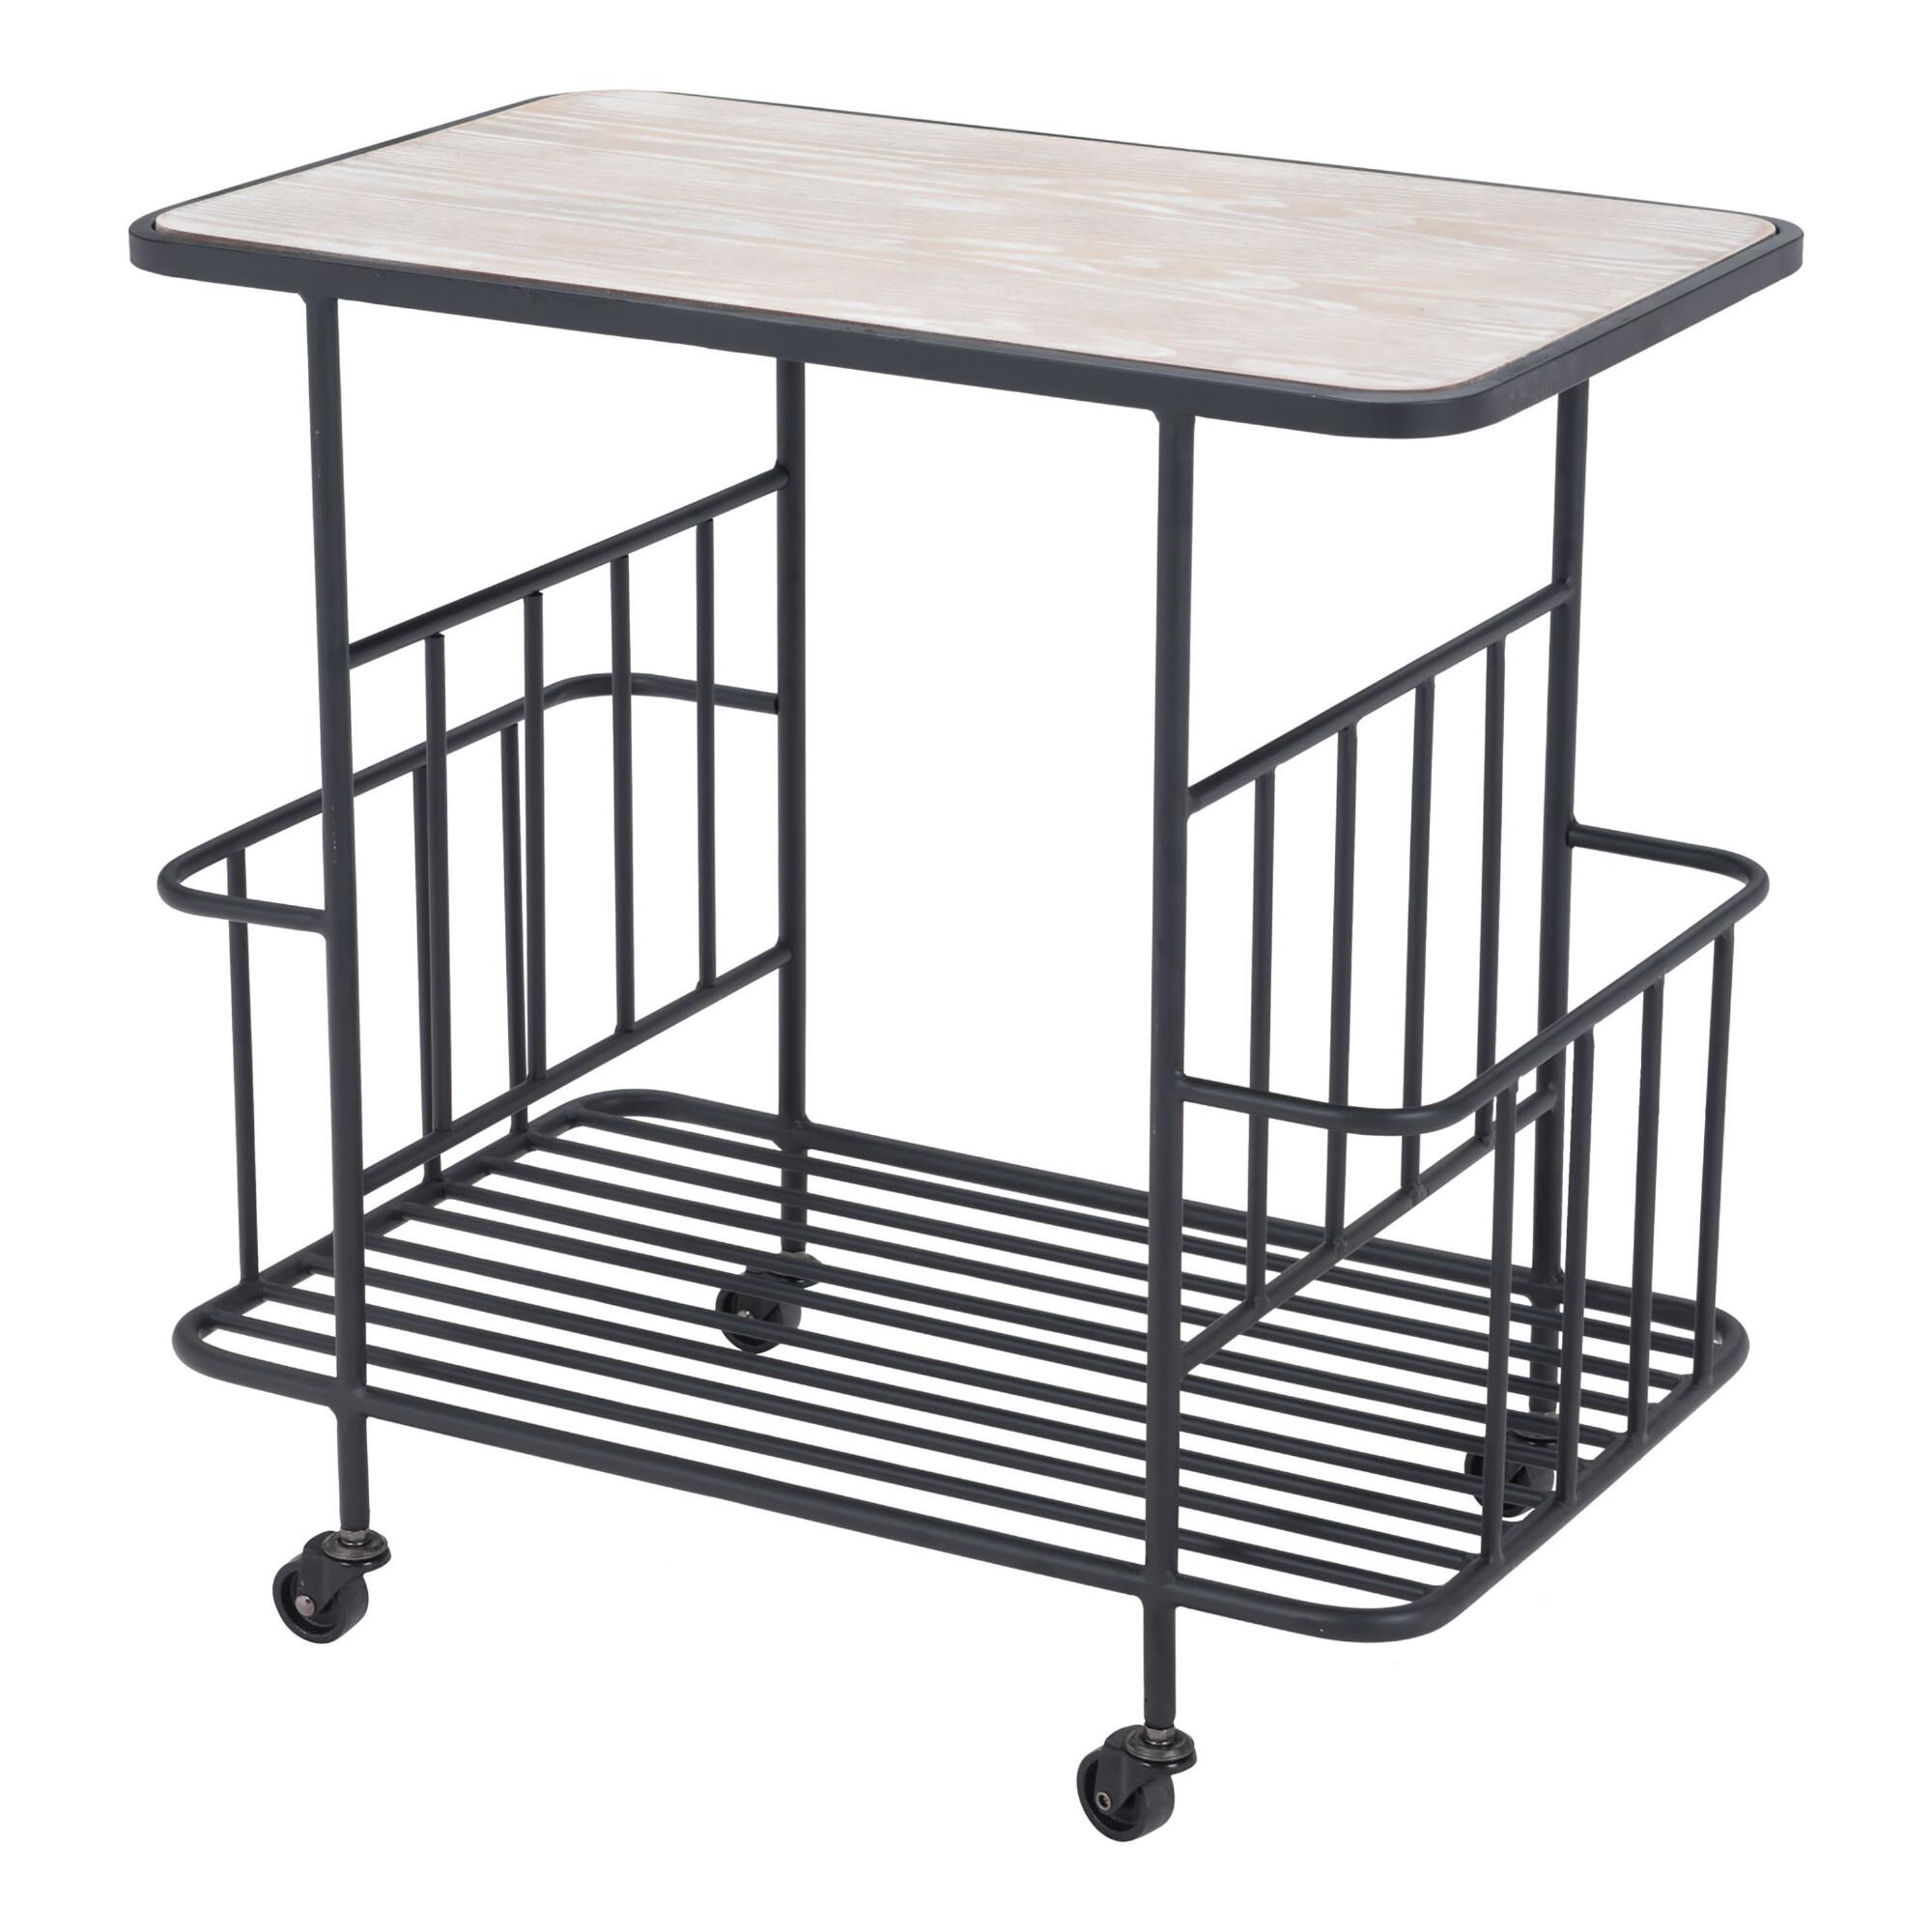 Steel and Wood Pacific 2 Tier Bar Cart: Black by World Market